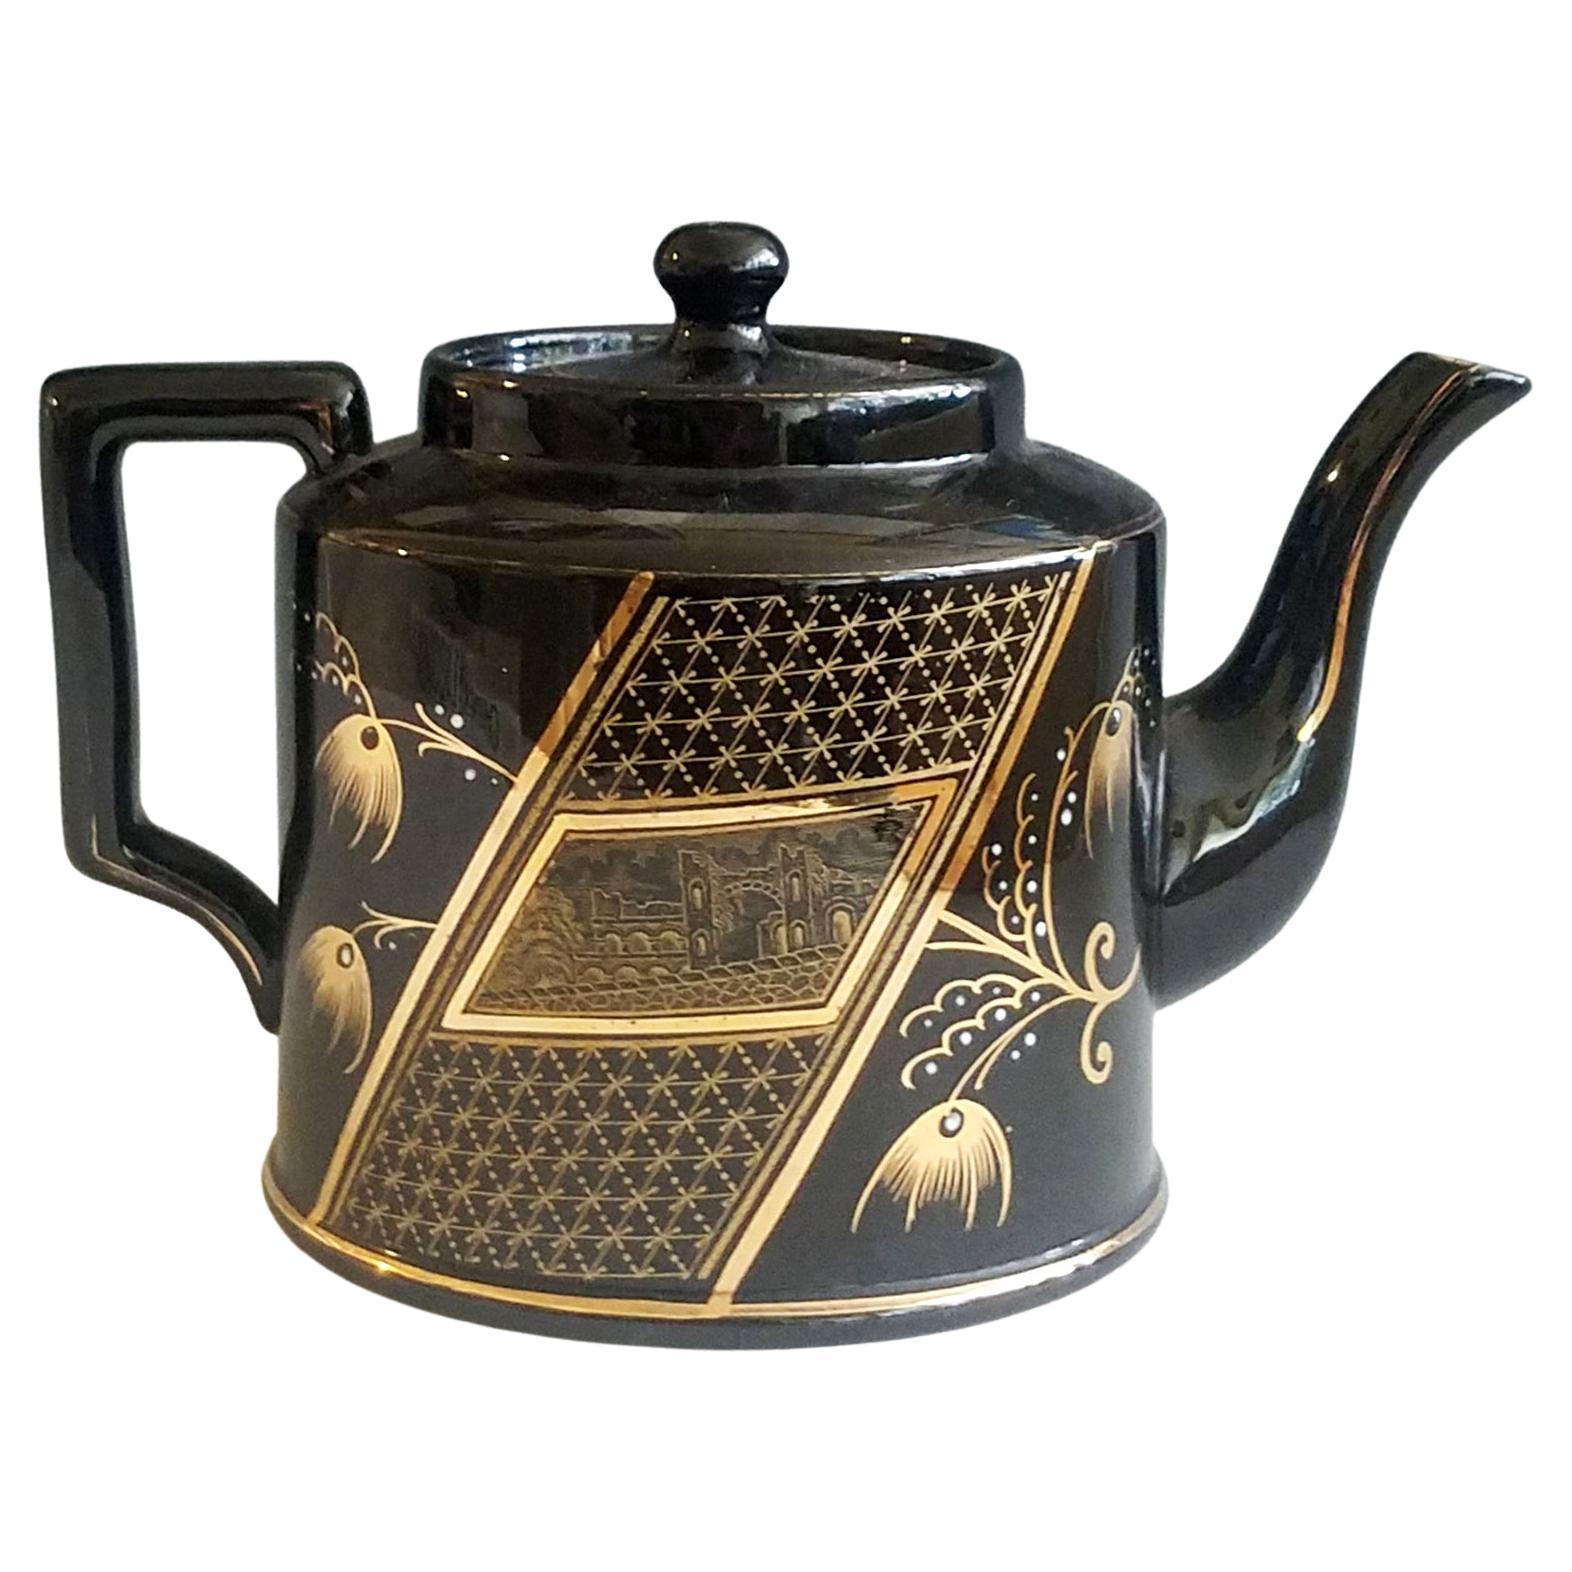 Aesthetic Movement Pottery Teapot and Cover